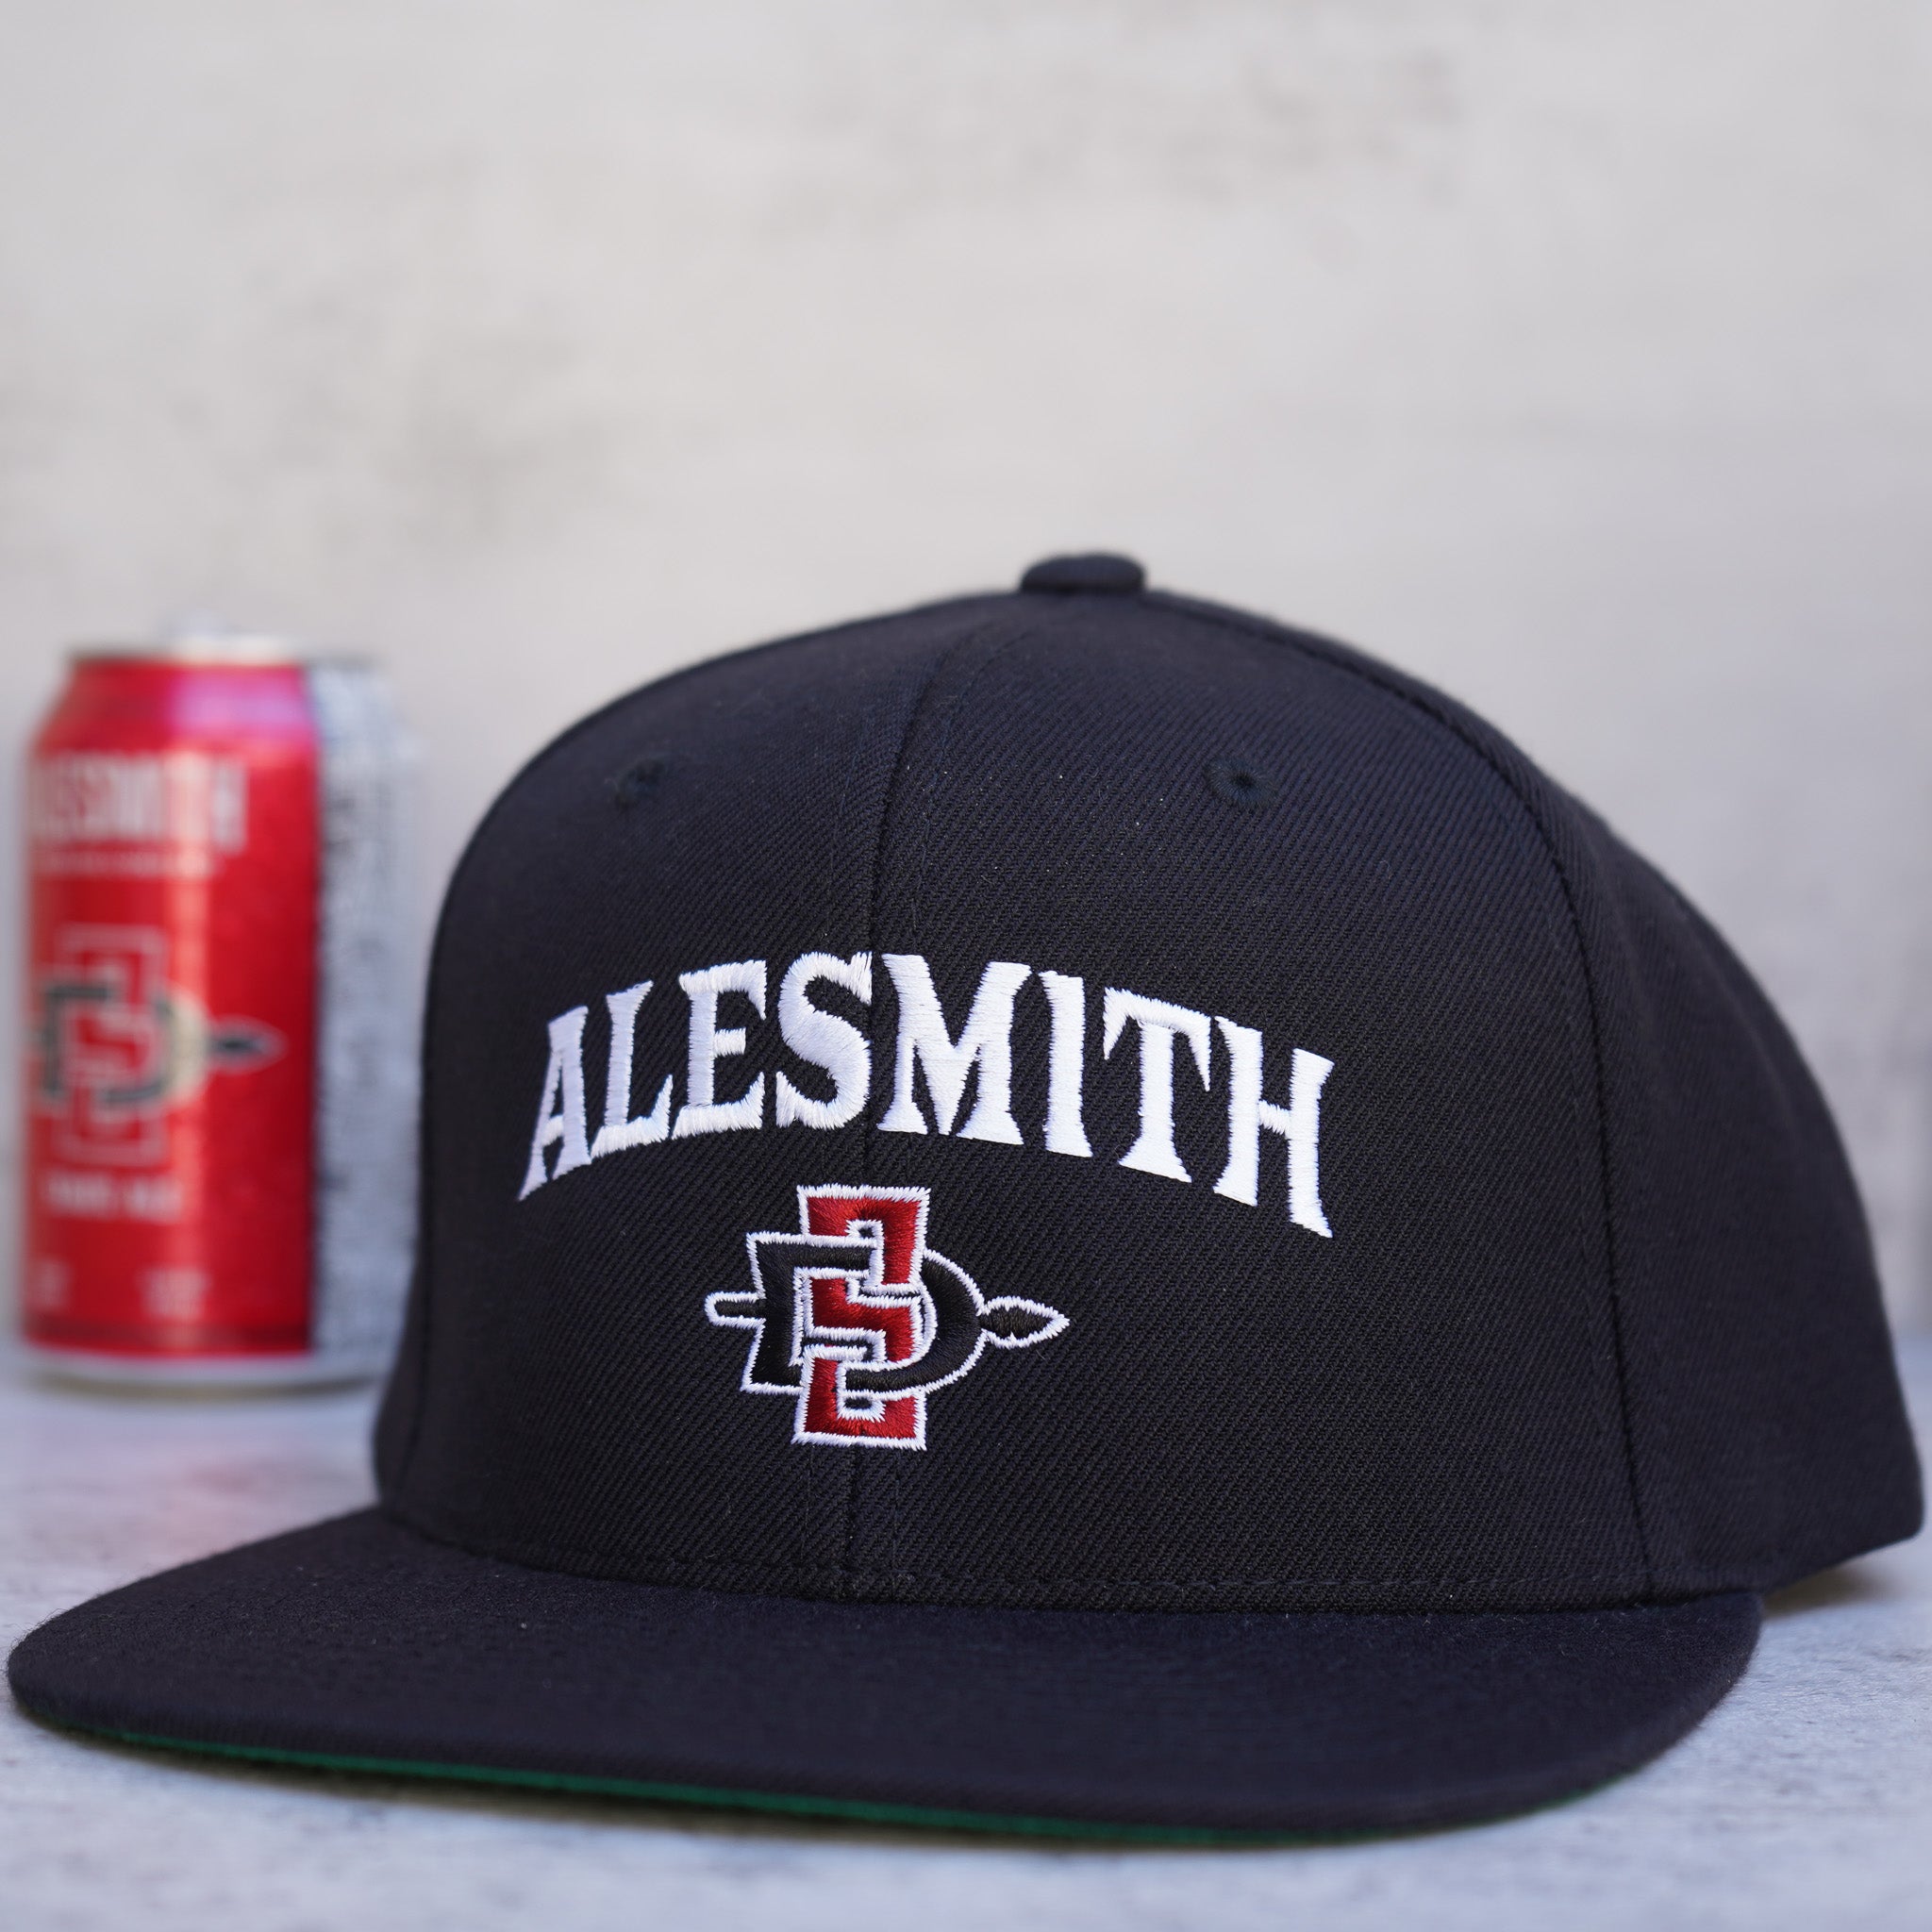 State Ale Snapback Hat - AleSmith Brewing Co.